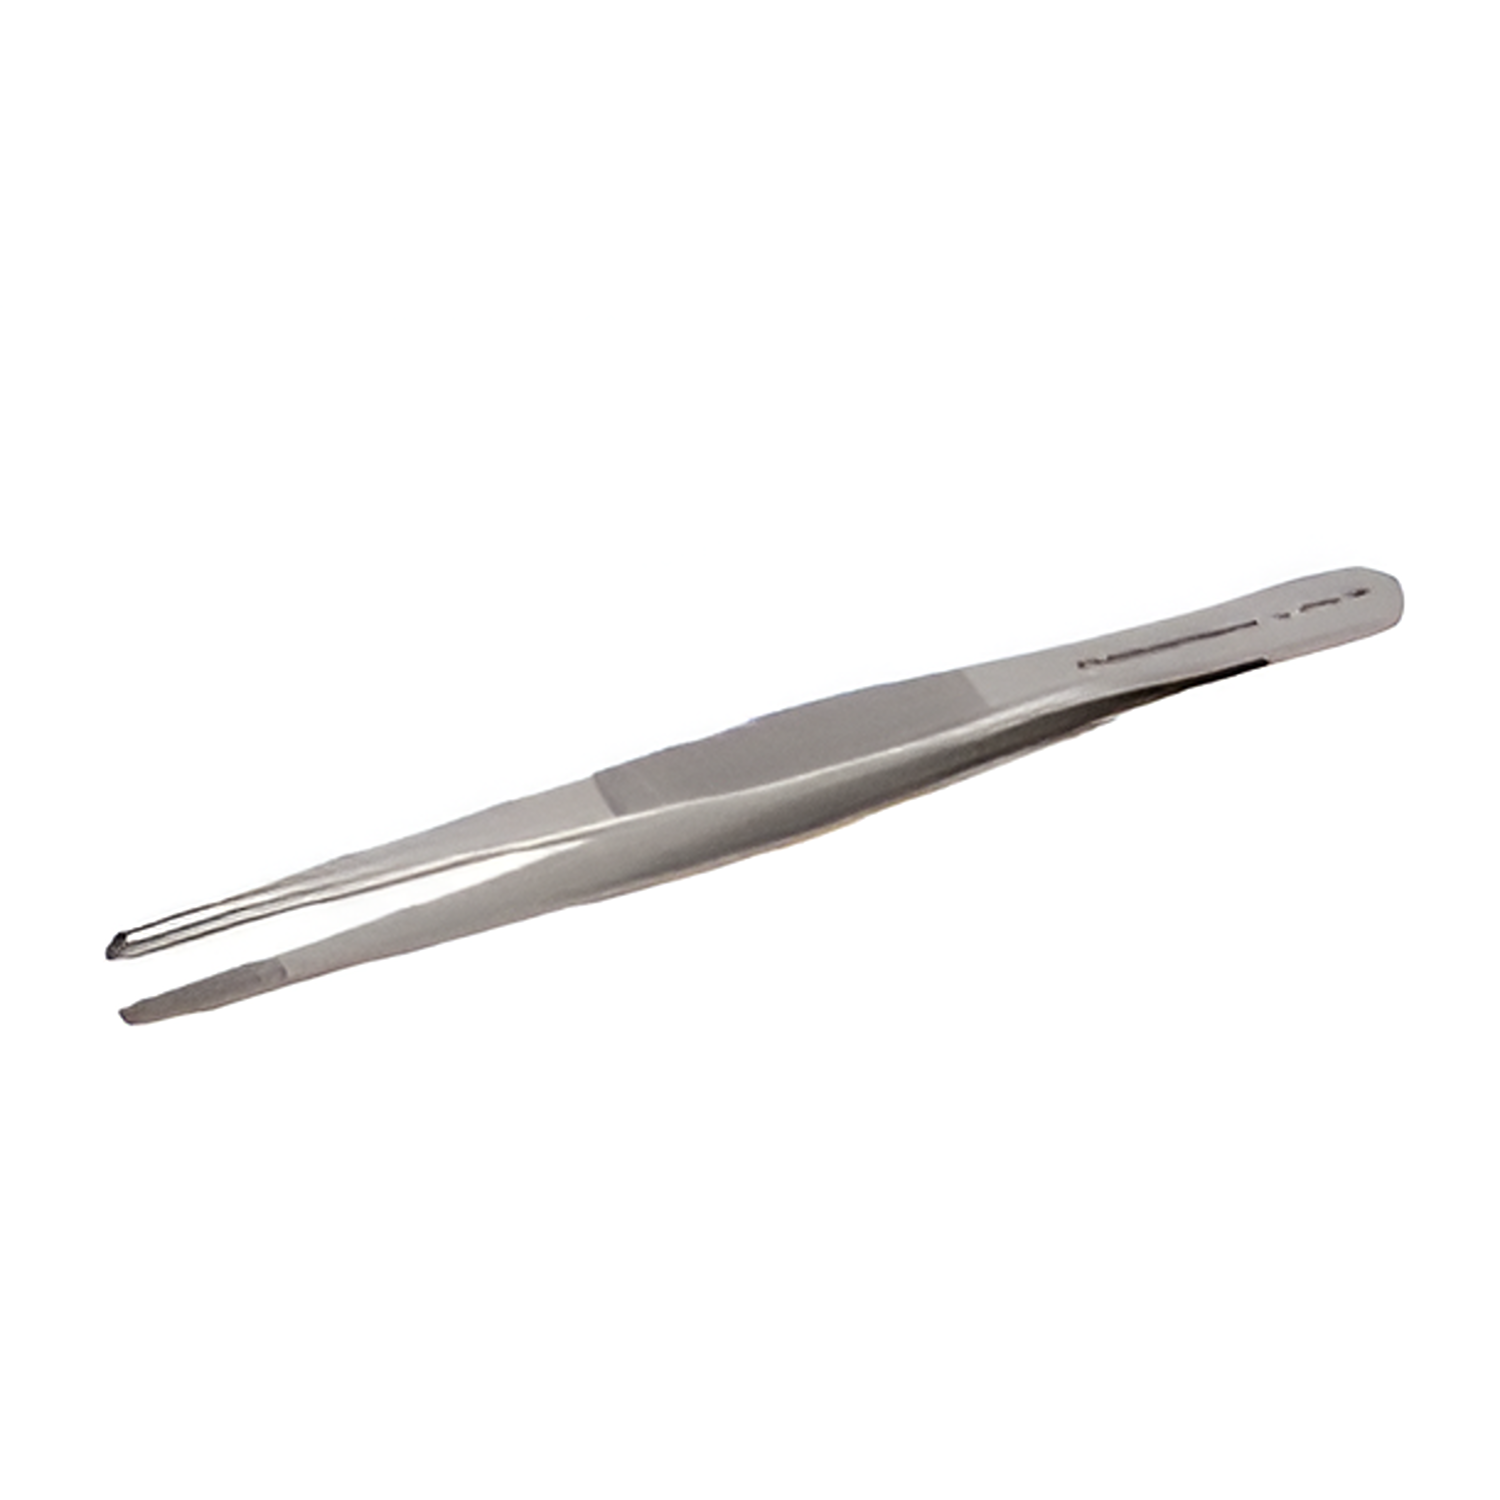 BAHCO TL 475-SA General Purpose Stainless Steel Tweezers - Premium Tweezers from BAHCO - Shop now at Yew Aik.